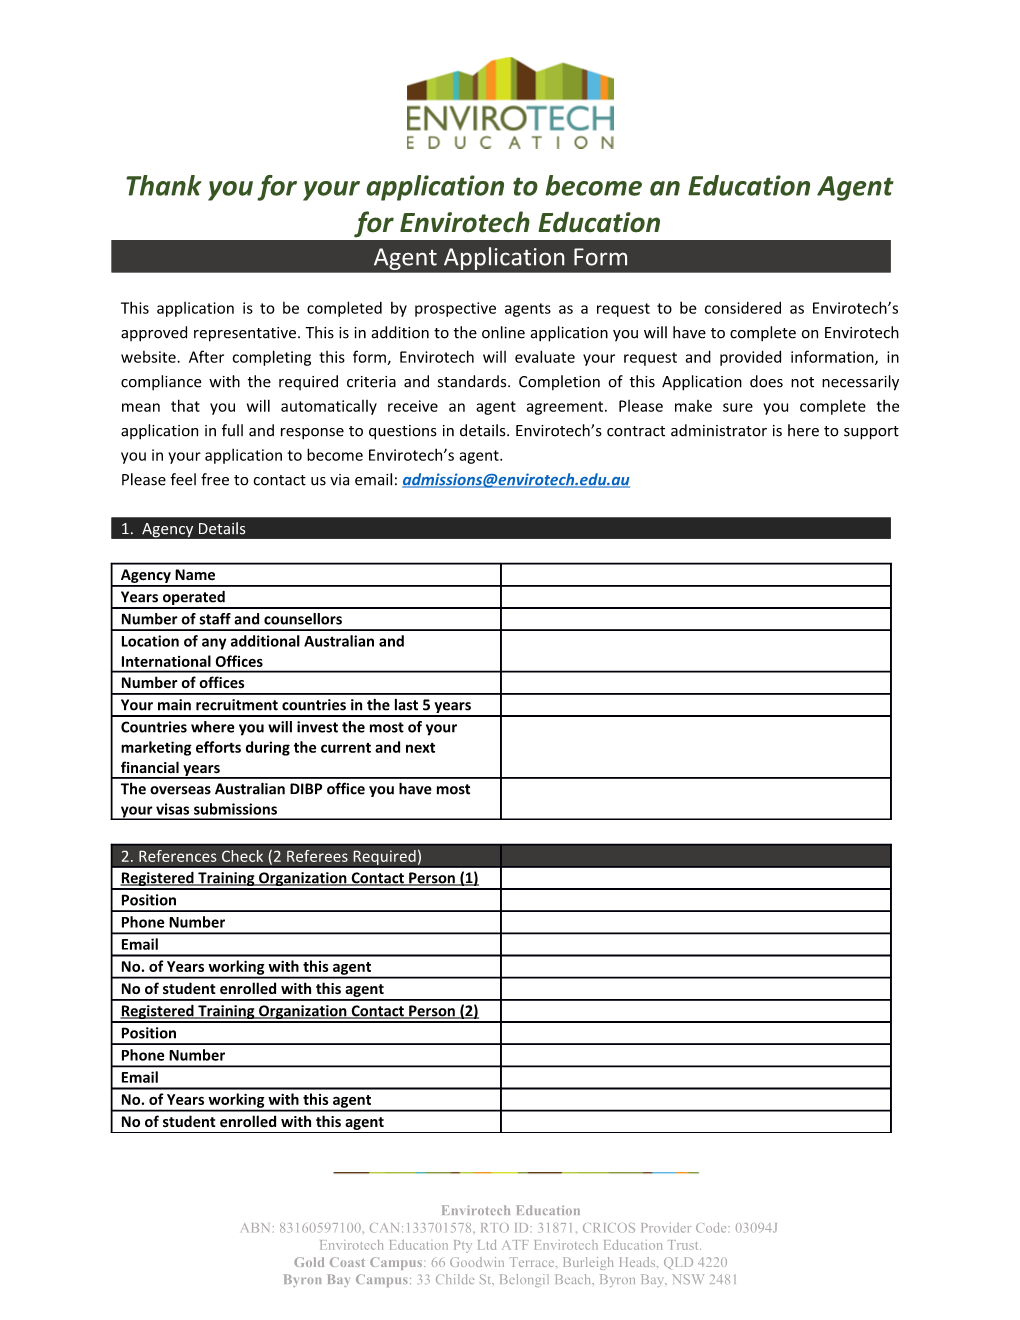 Thank You for Your Application to Become an Education Agent for Envirotech Education